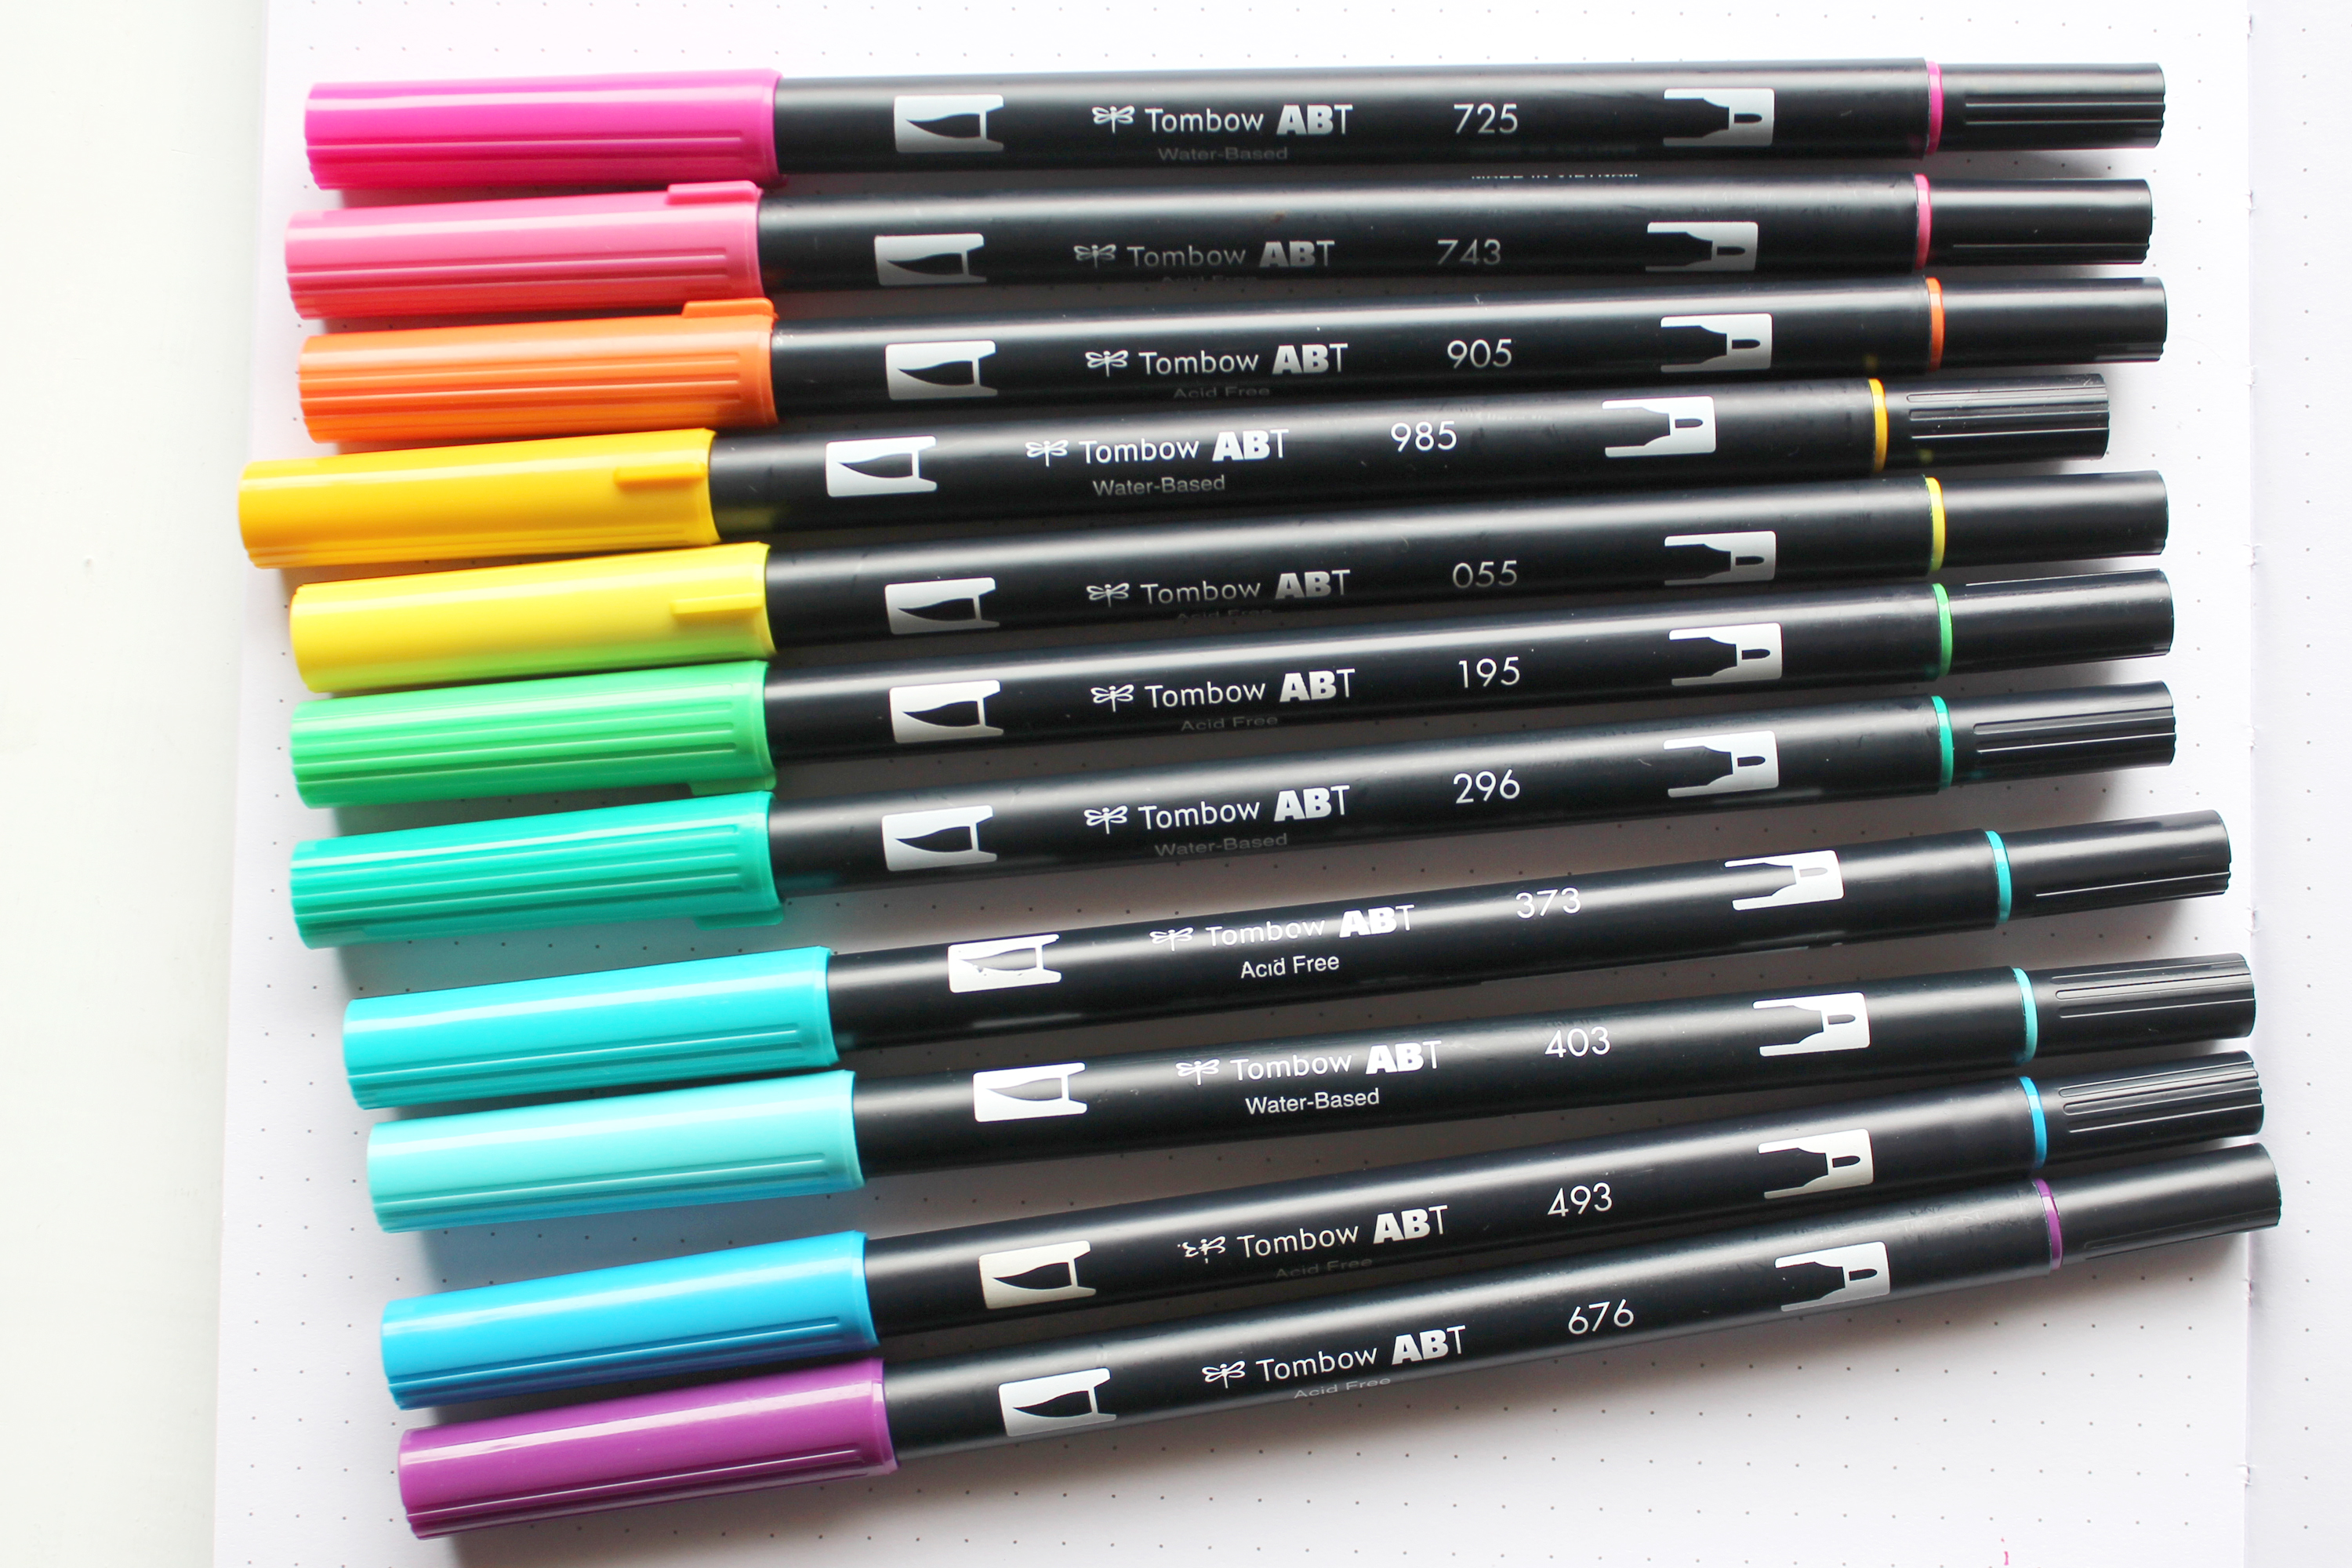 Tombow Dual Brush Pens in bright rainbow color order.